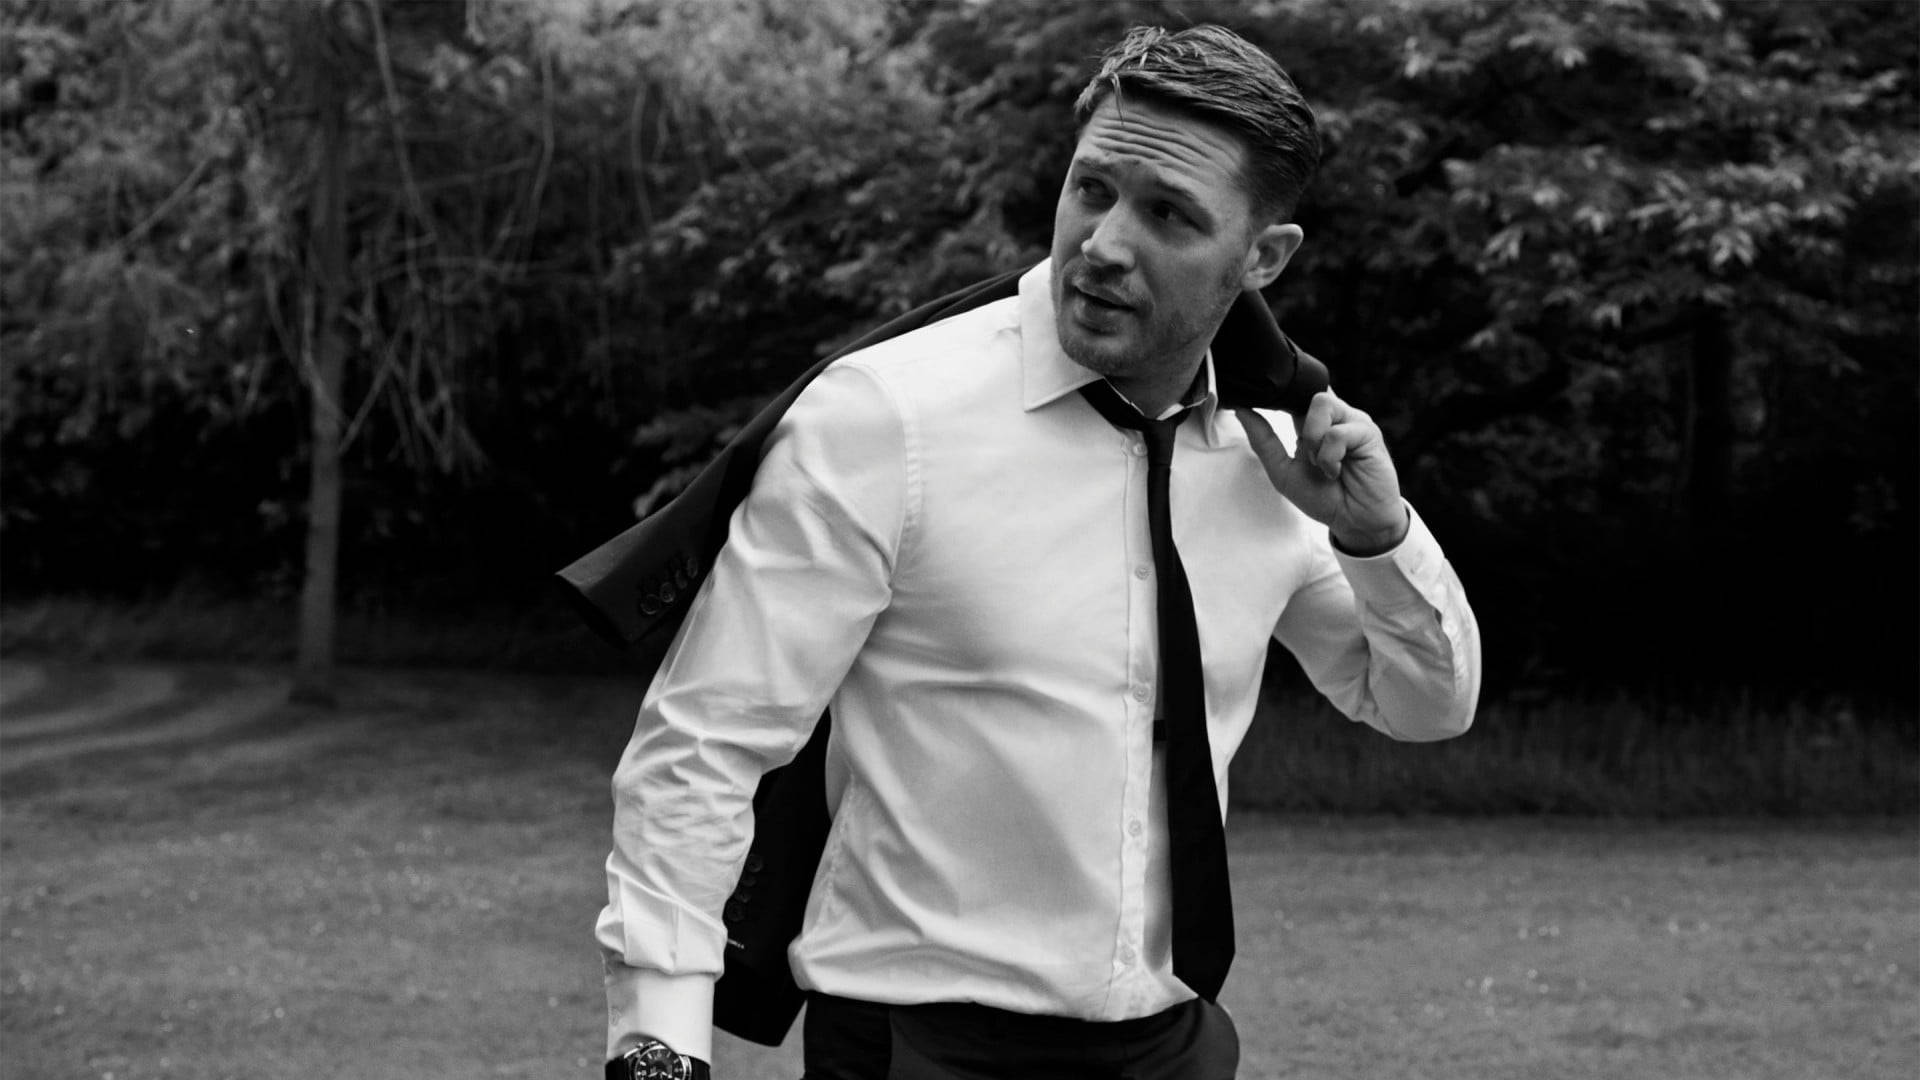 Free Tom Hardy Wallpaper Downloads, [100+] Tom Hardy Wallpapers for FREE |  